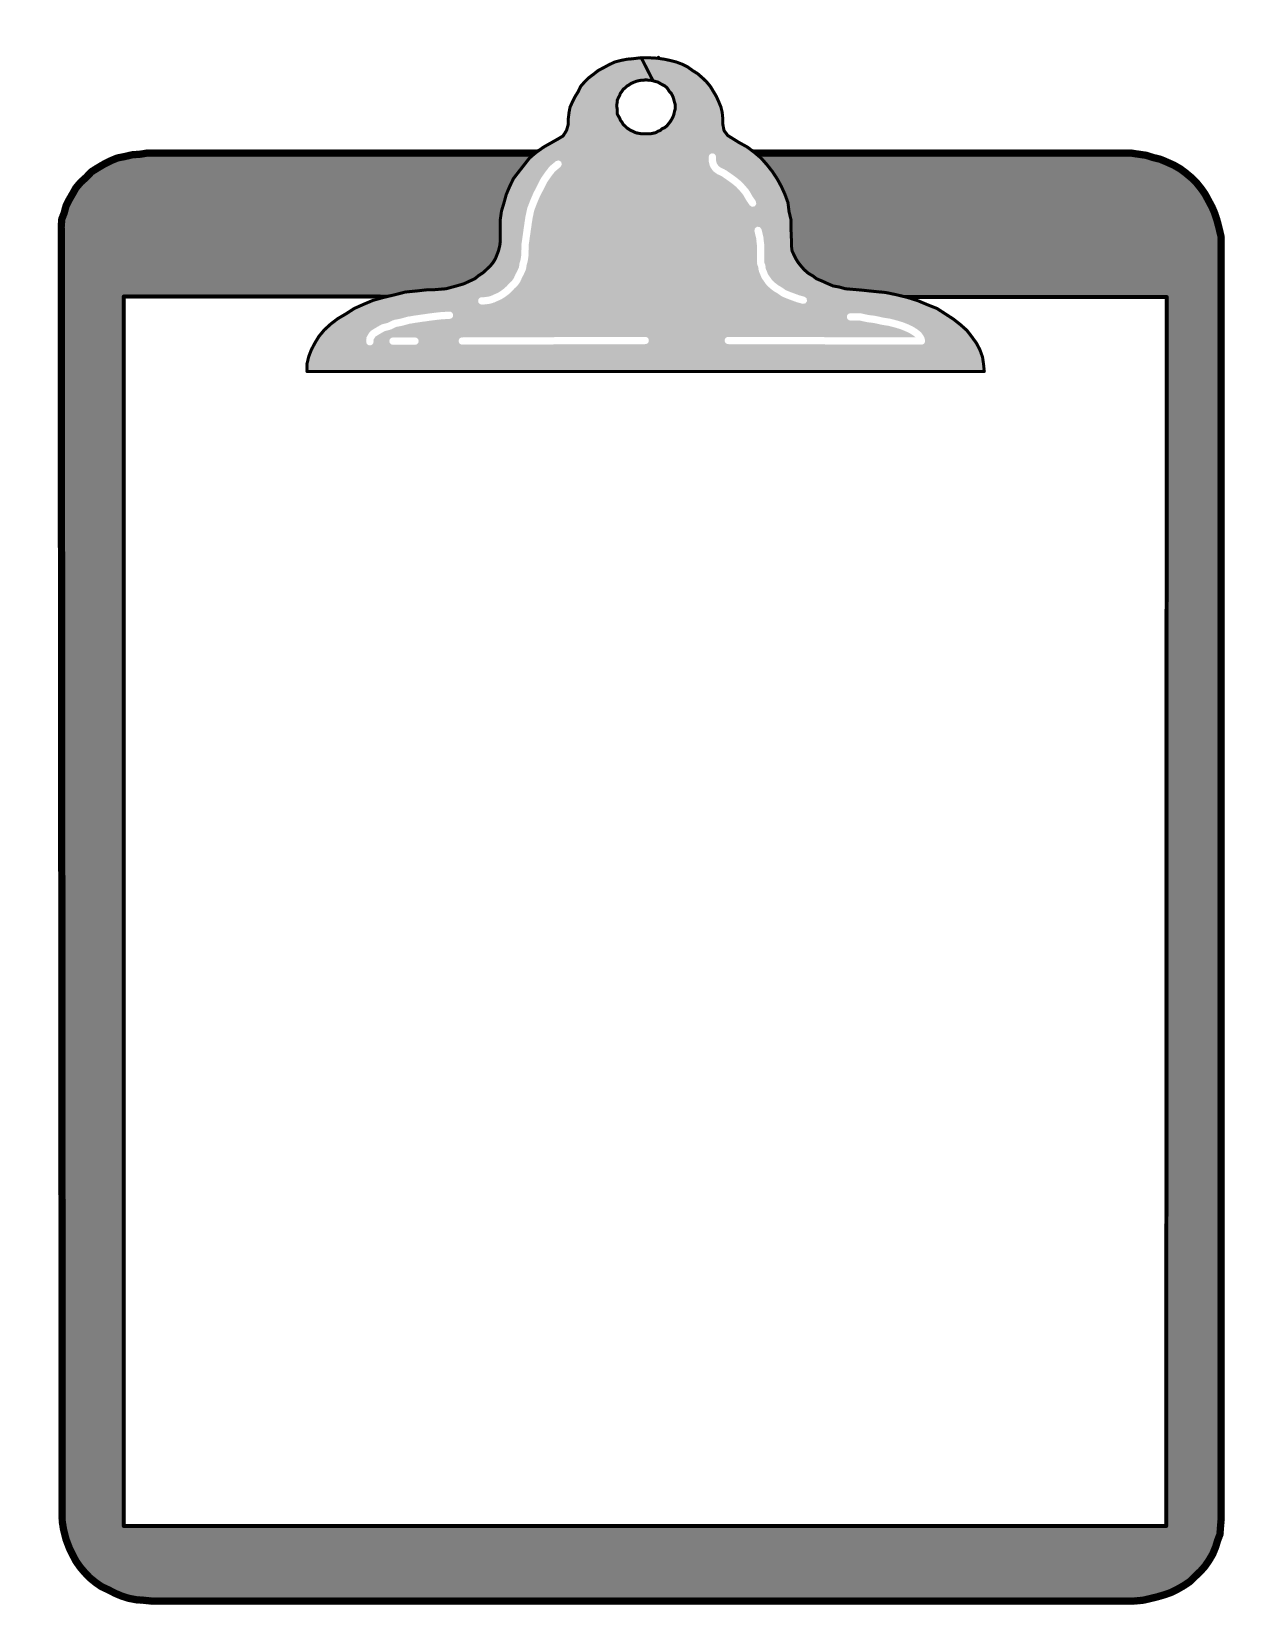 Clipboard boardmember black and white clipart kid